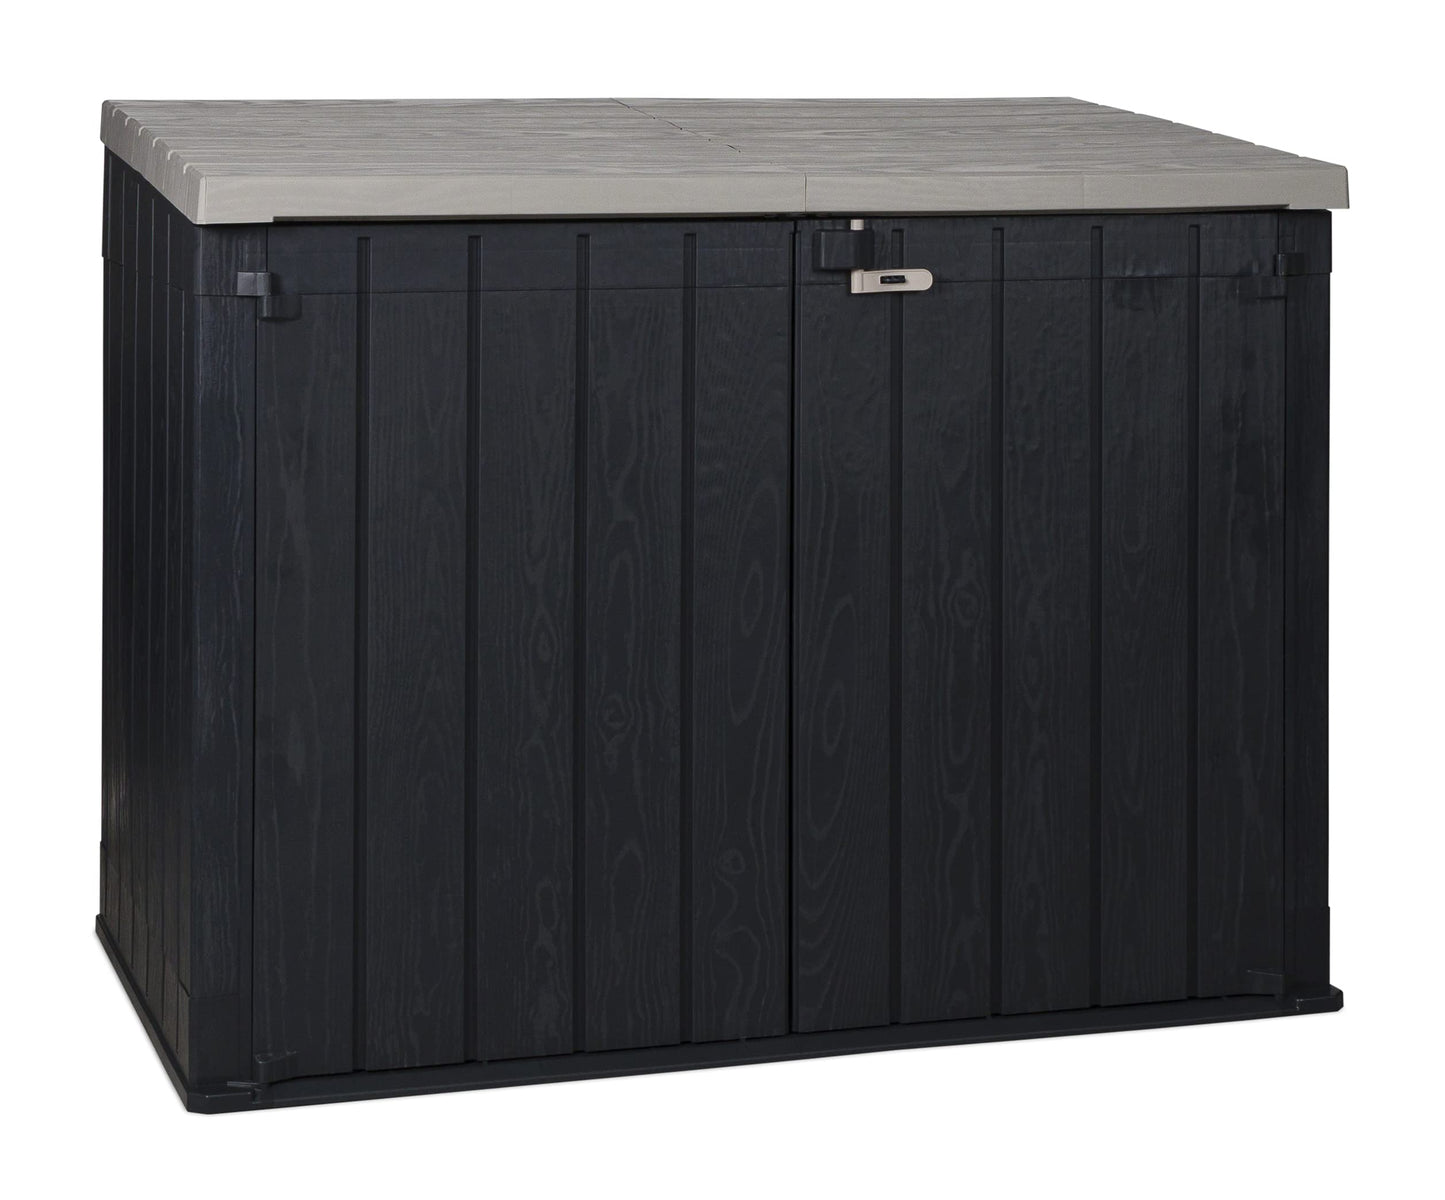 Toomax Stora Way All-Weather Outdoor Horizontal 6 x 3.5' Storage Shed Cabinet for Garden Tools and Yard Equipment, Taupe Gray Box, Anthracite Lid Gray/Anthracite